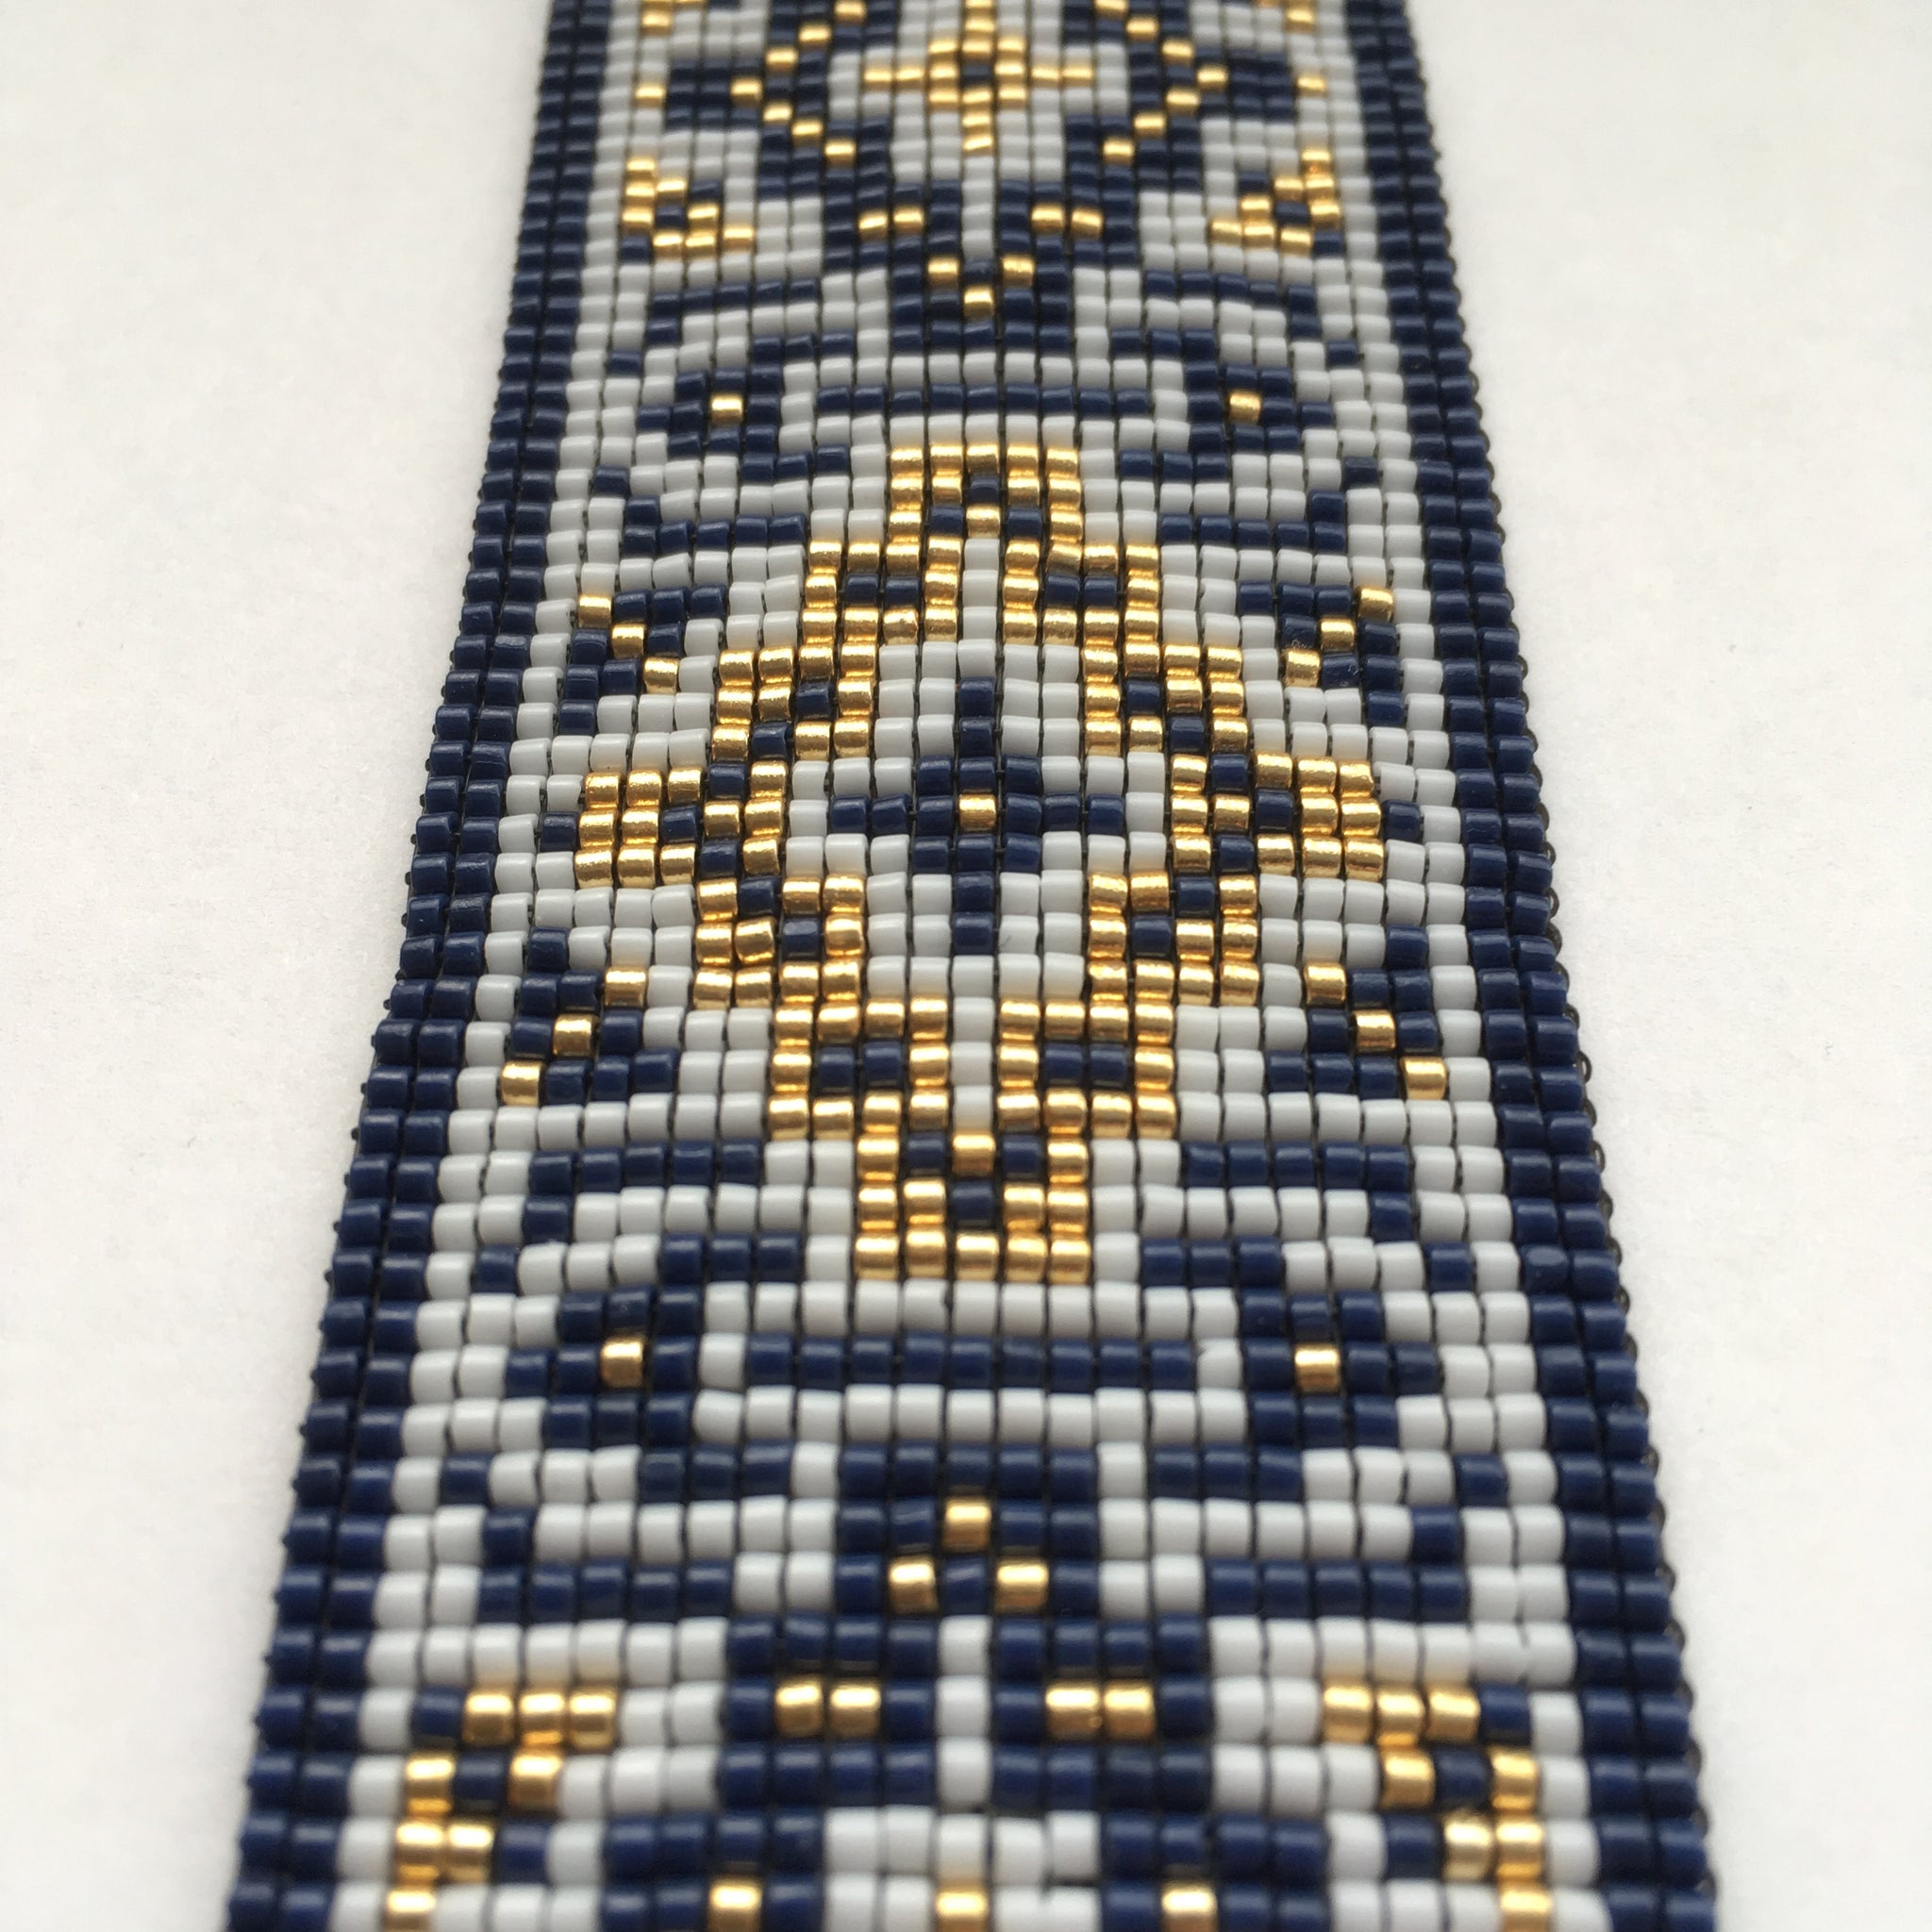 Classic Navy Gold and White Bead Loom Pattern by Susan Pelligra Digital Down load PDF